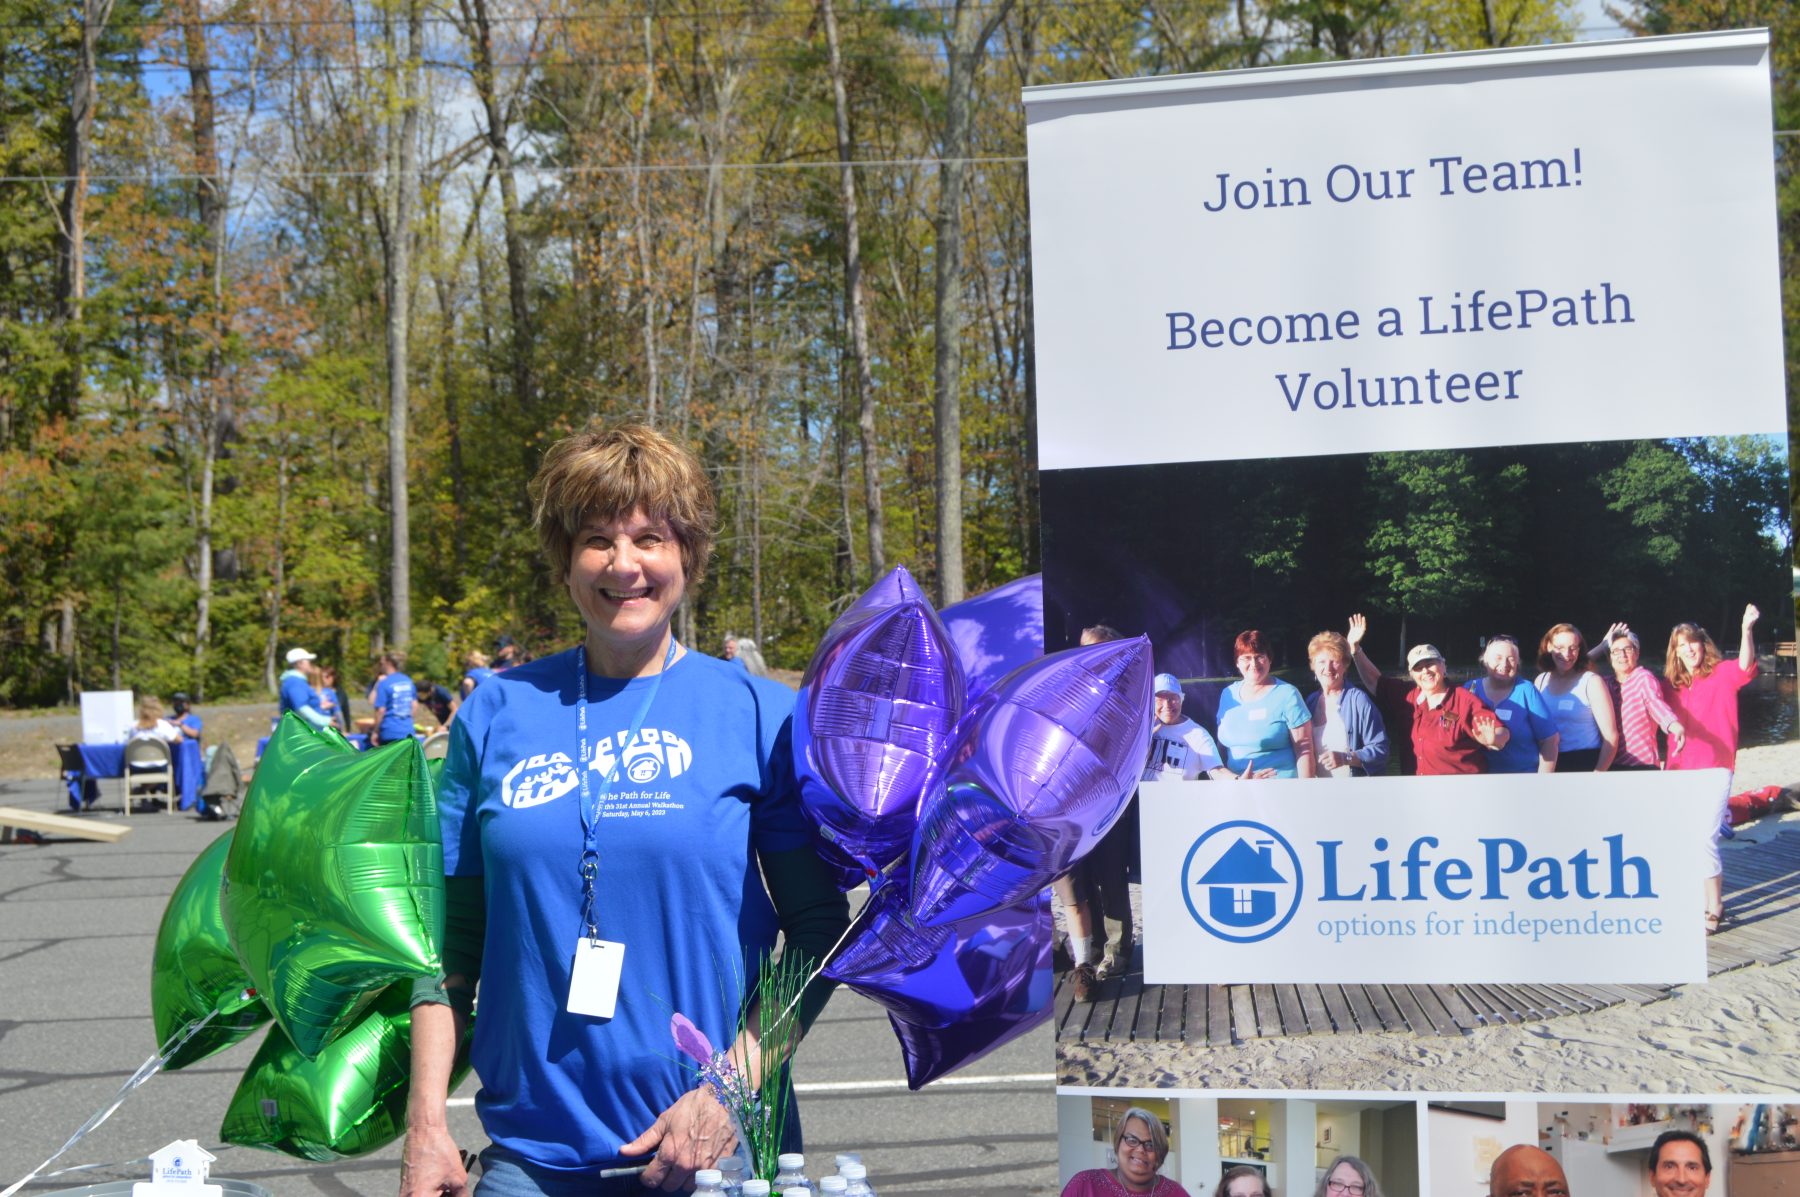 A LifePath staff member stands with balloons and a sign saying "Join Our Team! Become a LifePath Volunteer."